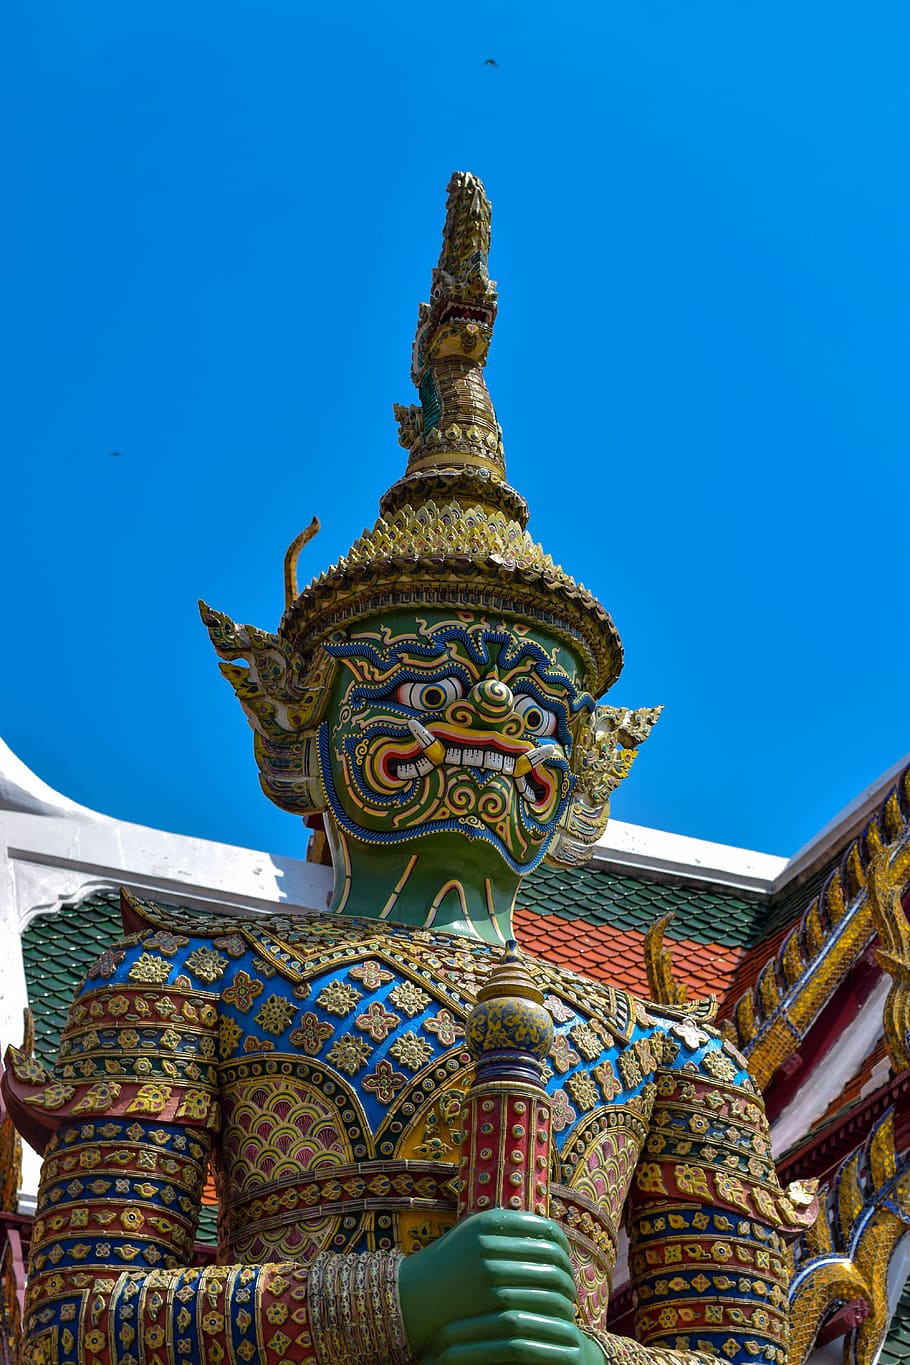 religion, culture, asia, thailand, giant, spirituality, belief, architecture, built structure, low angle view